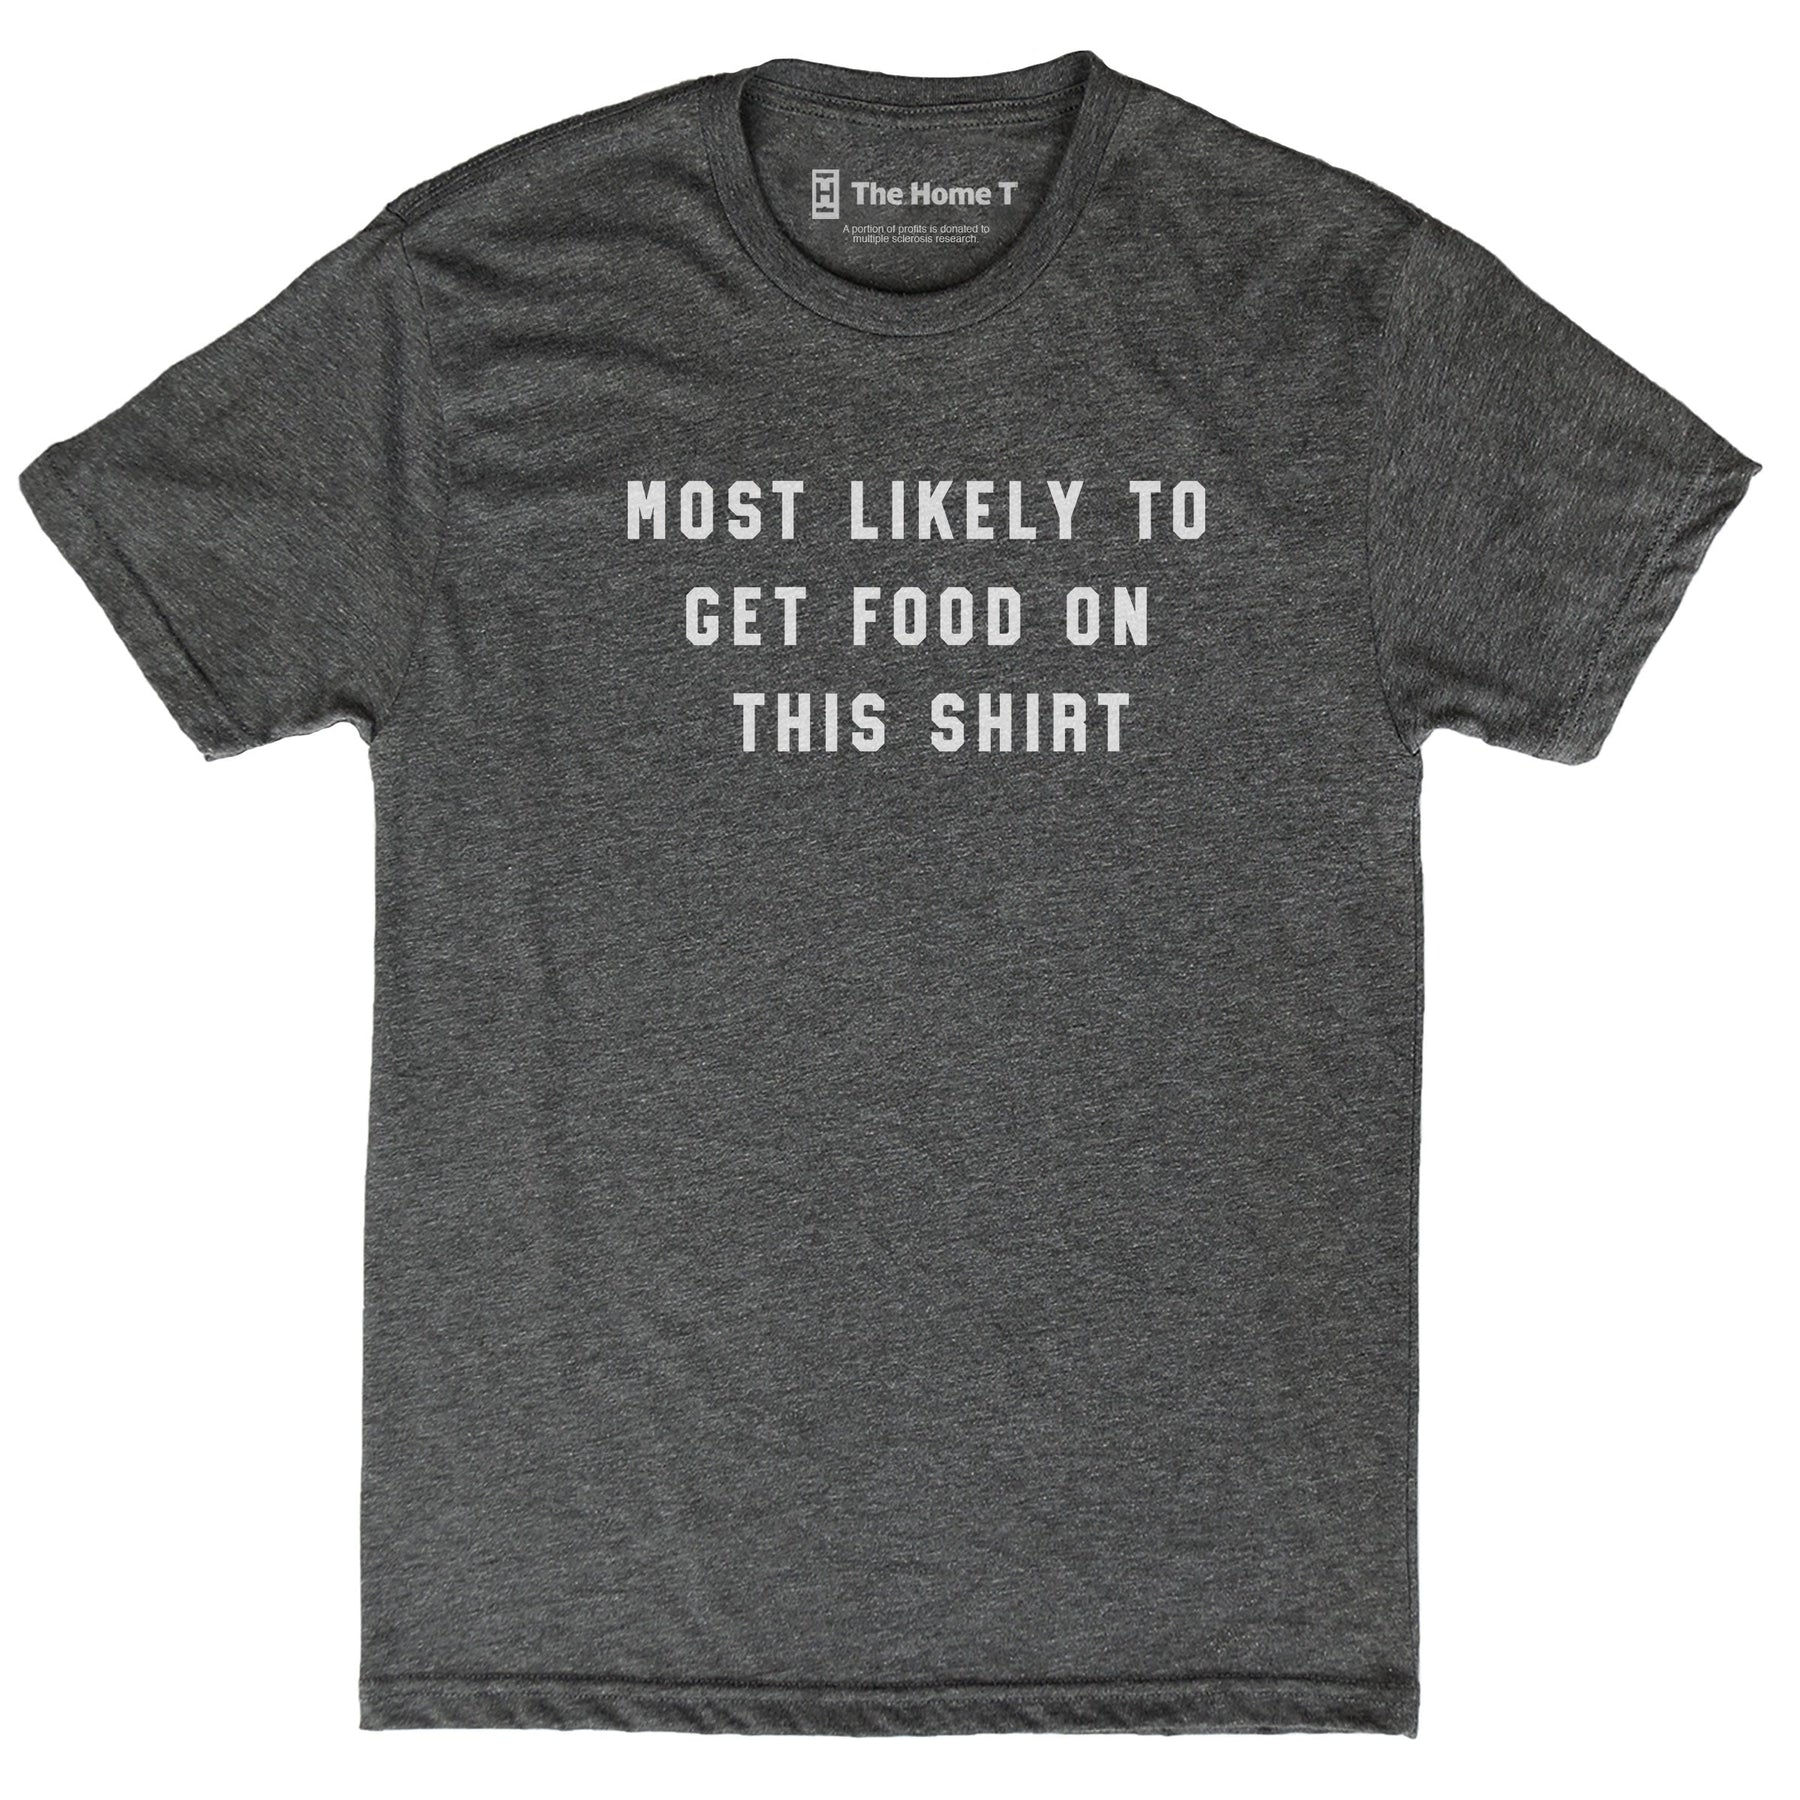 Most Likely to Get Food on This Shirt